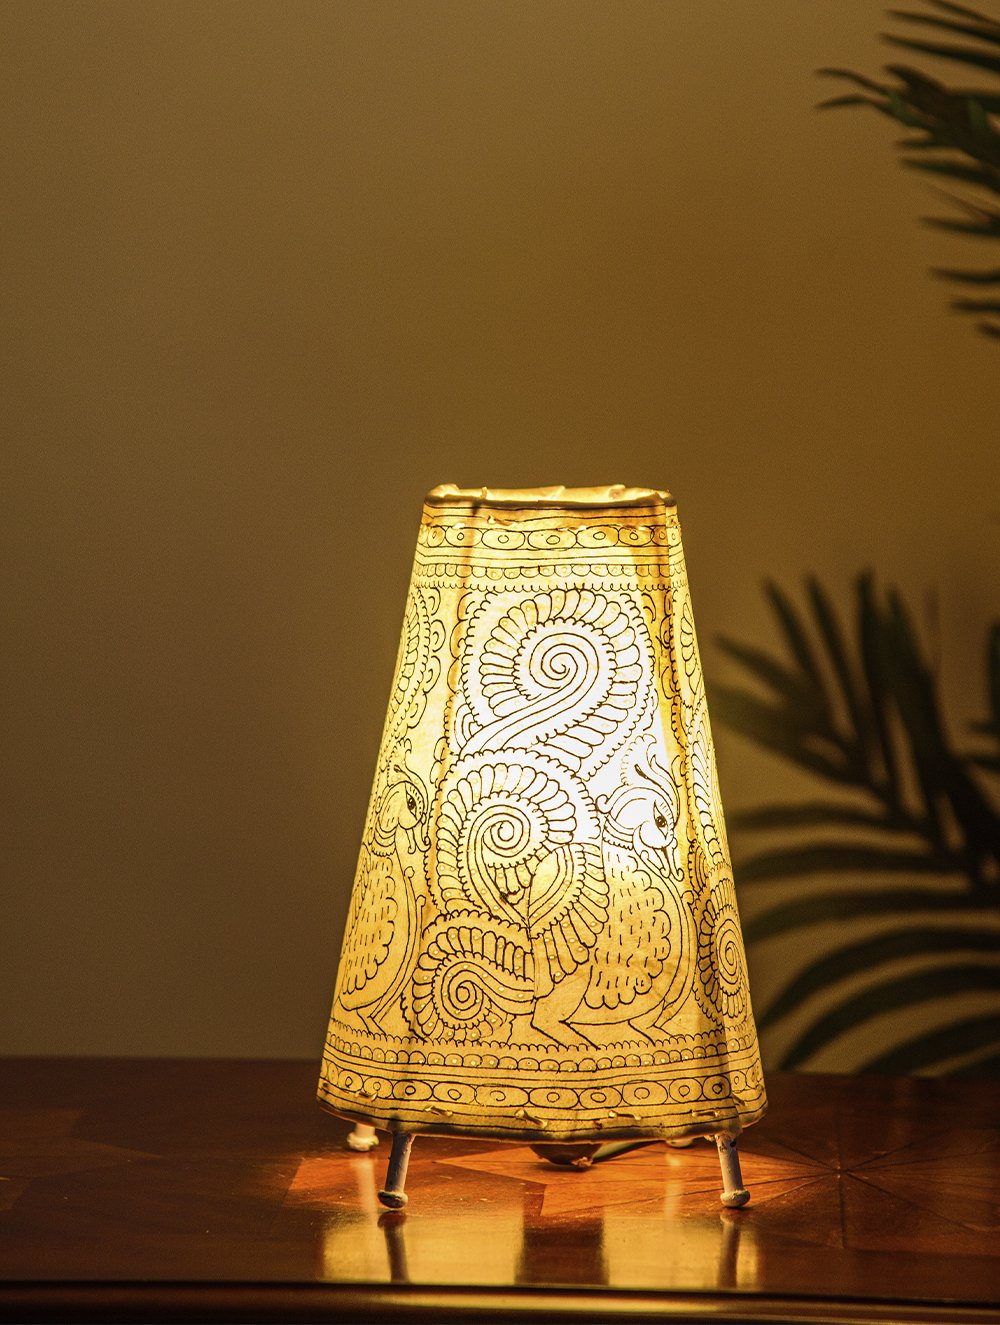 Load image into Gallery viewer, The India Craft House Andhra Multicoloured Painted Leather Table Lamp Shade - Bird Motif